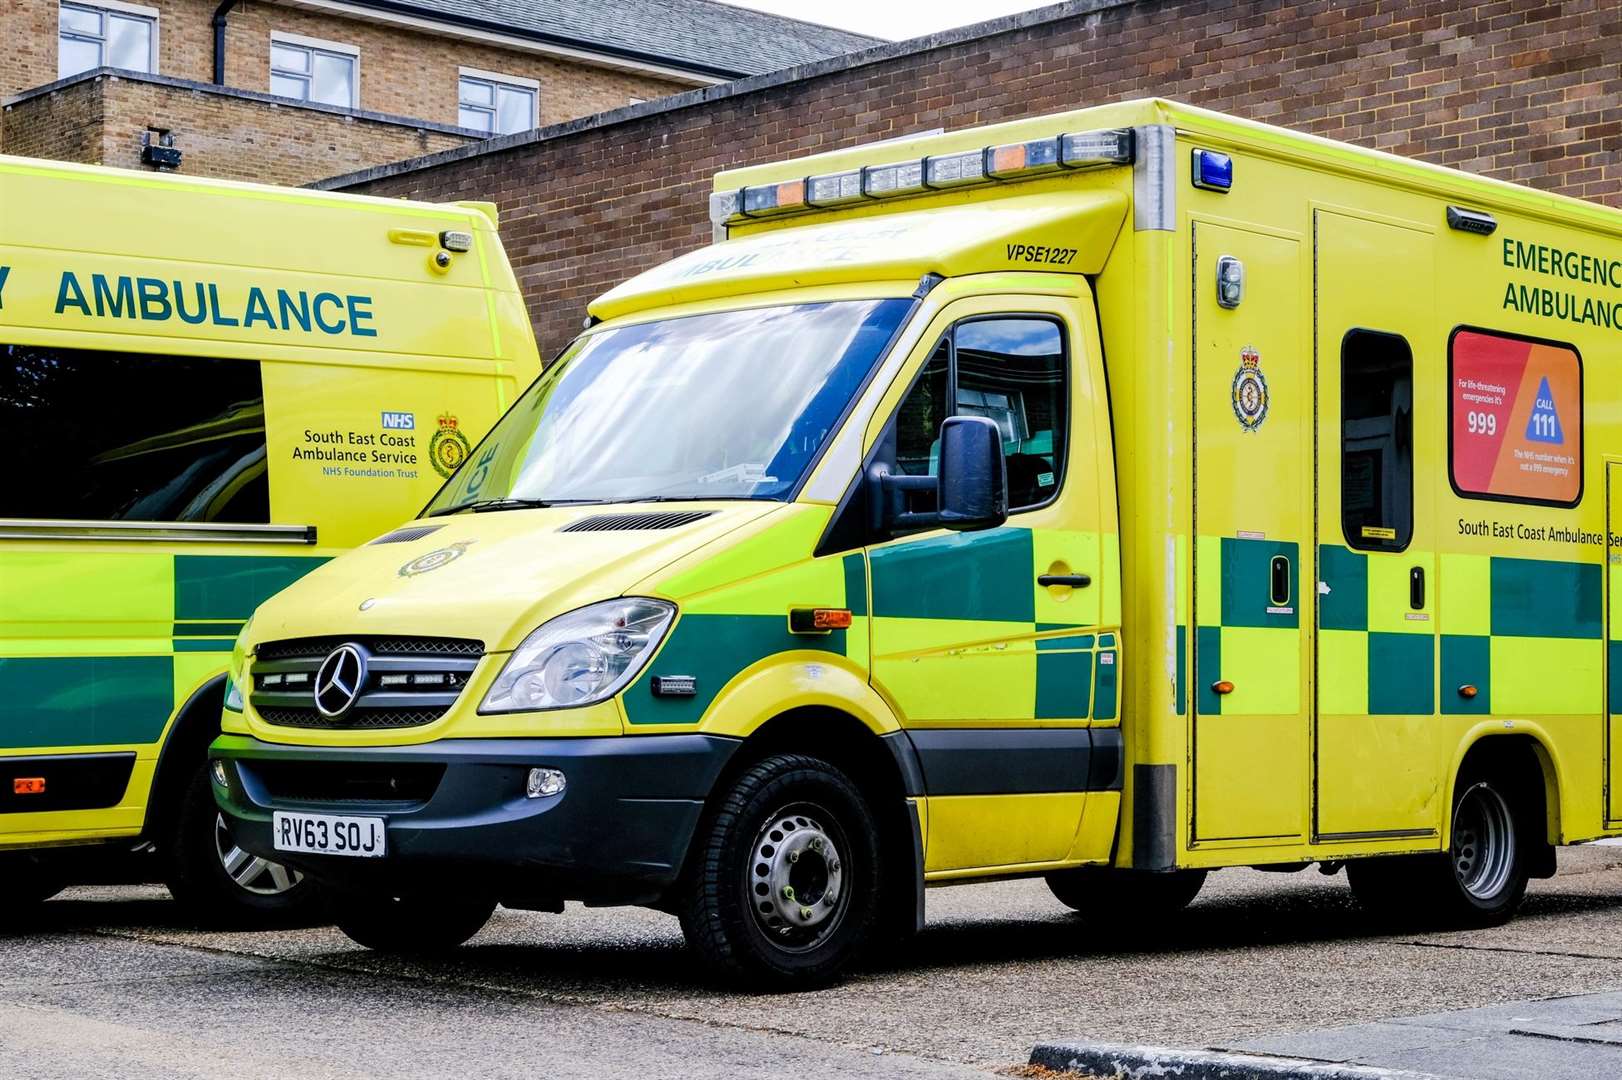 In an emergency patients should continue to use 999 or A&E departments. Image: iStock.